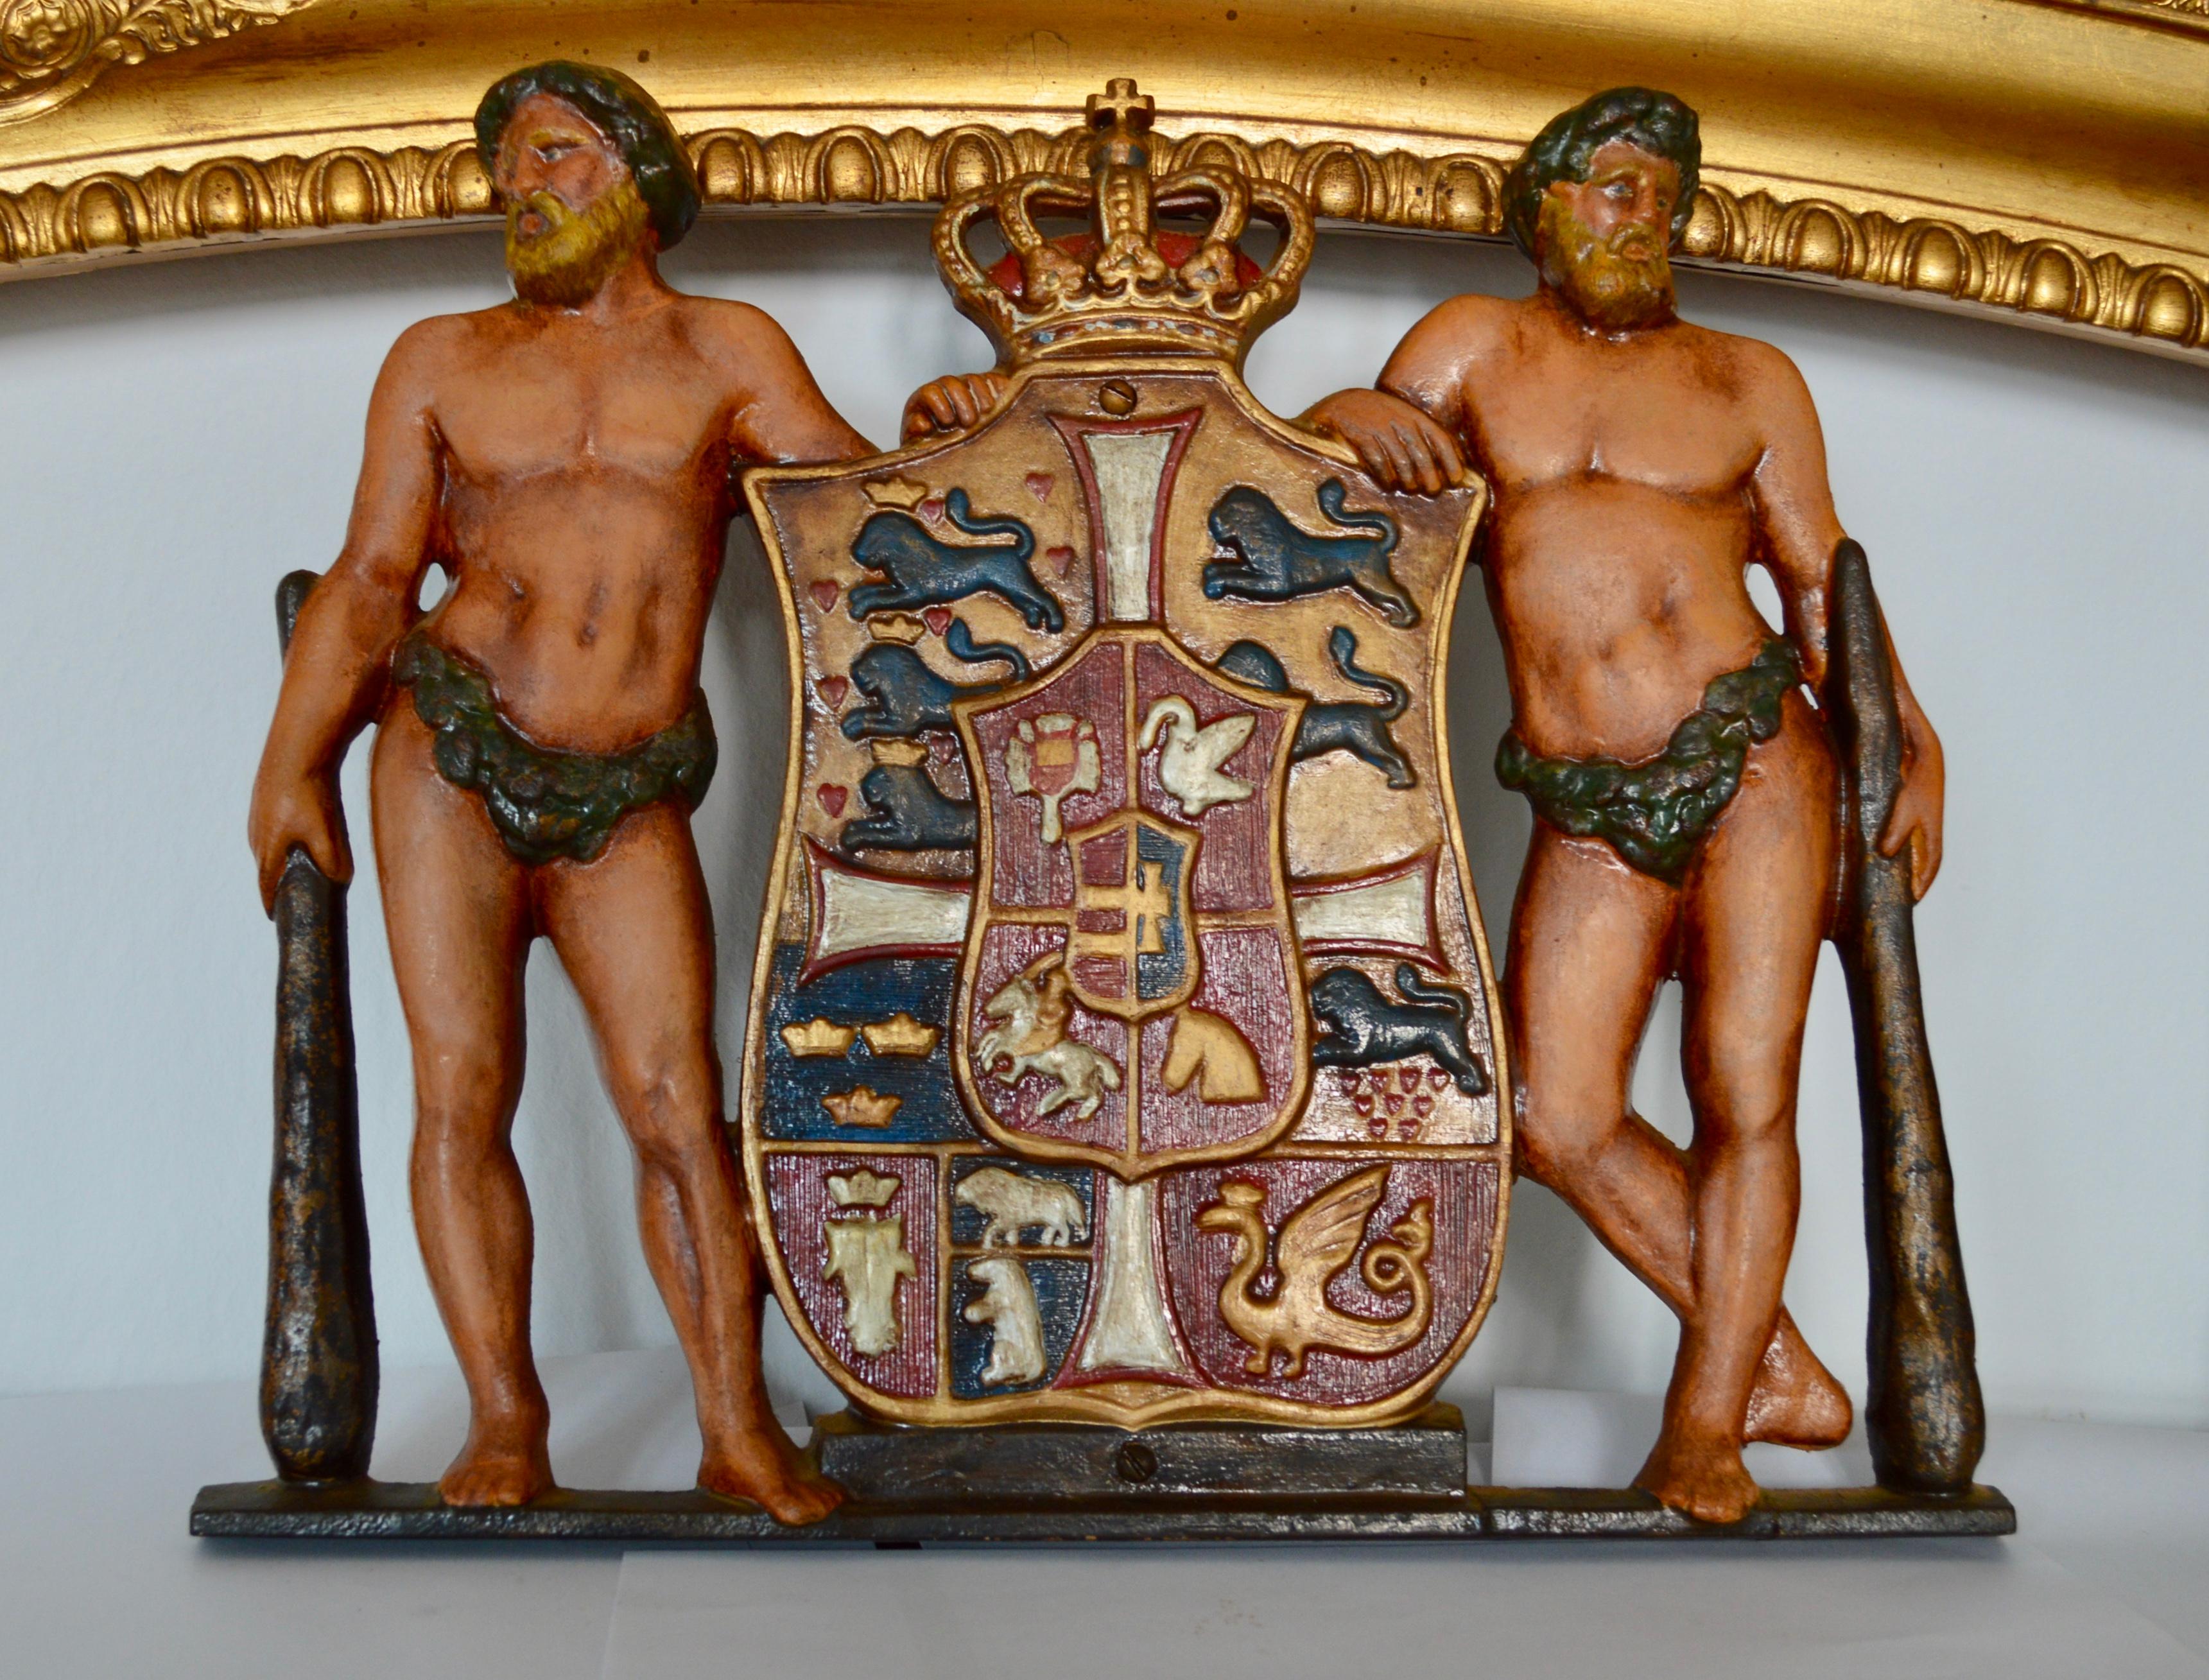 Cast Iron Sculpture Of The Royal Coat of Arms of Denmark 3